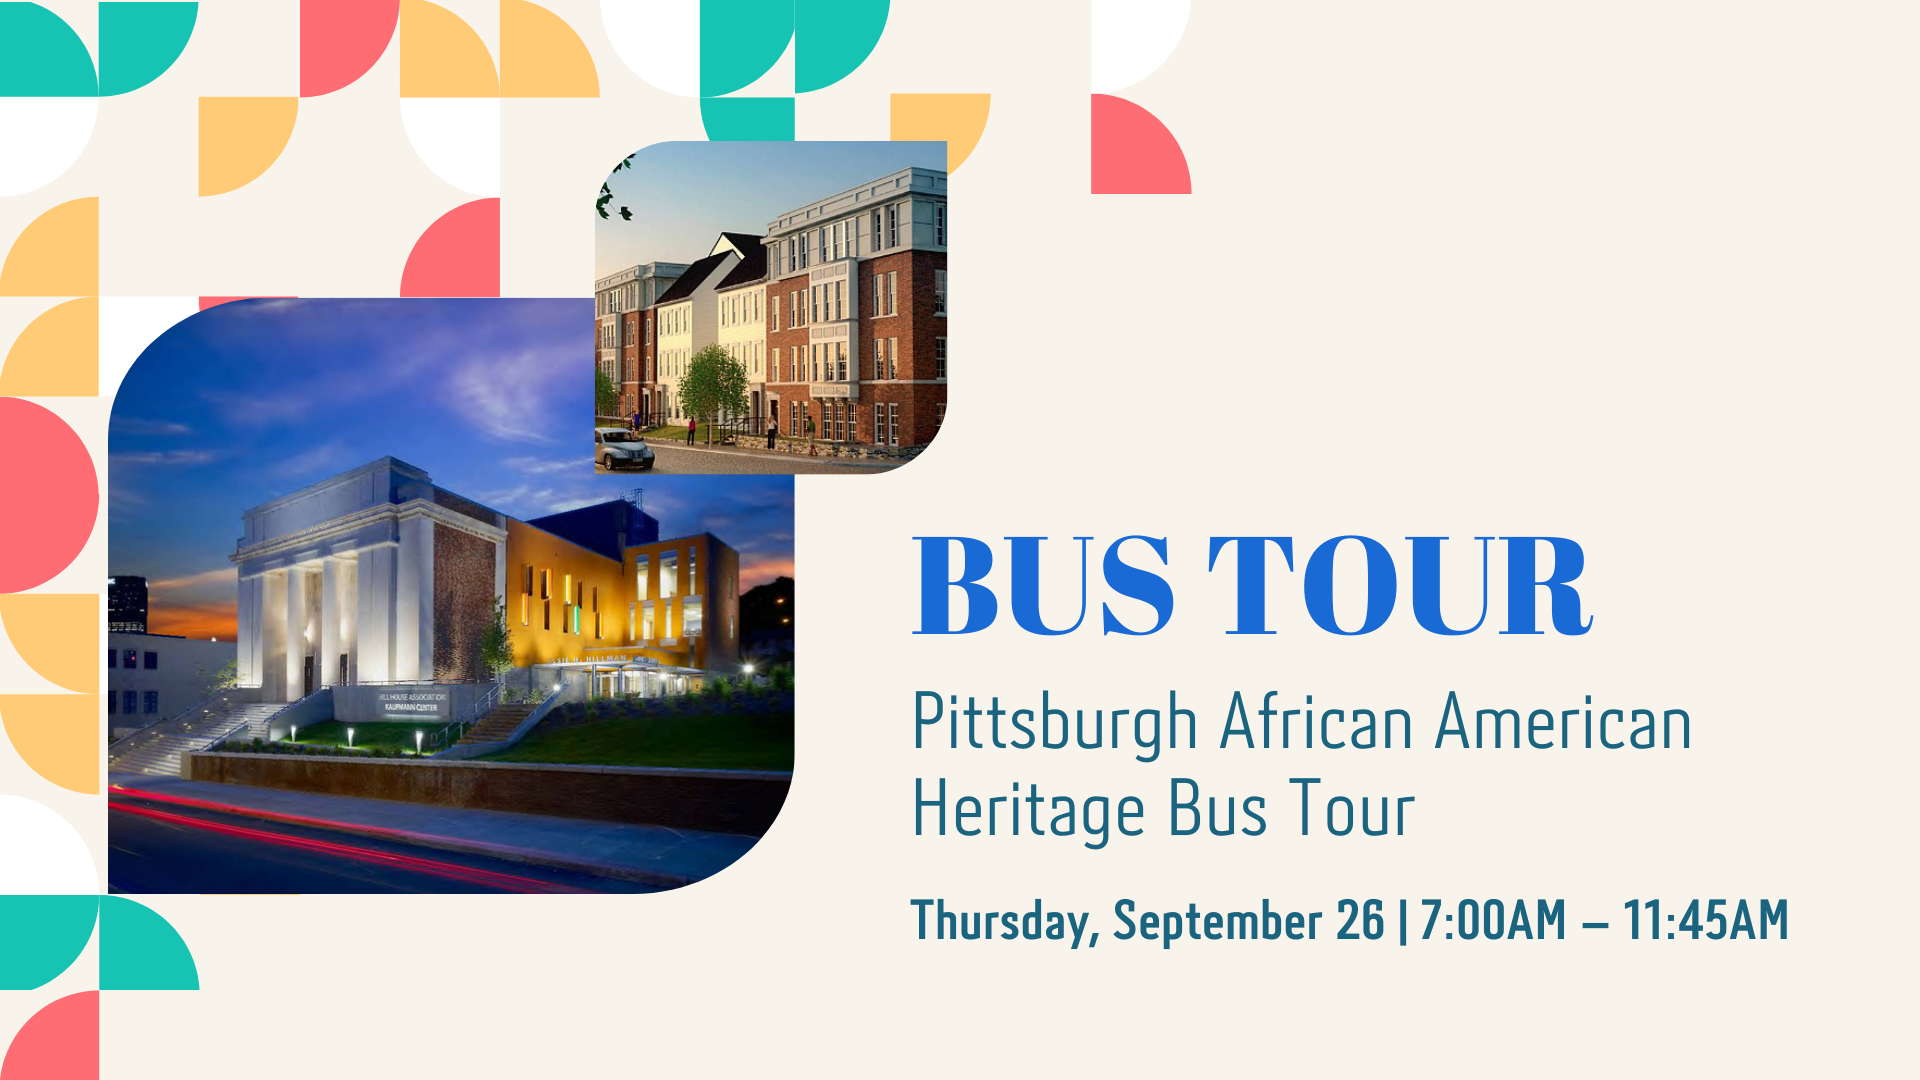 Bus Tour - Pittsburgh African American Heritage Bus Tour. Thursday, Sept. 26 | 7 am - 11:45 am